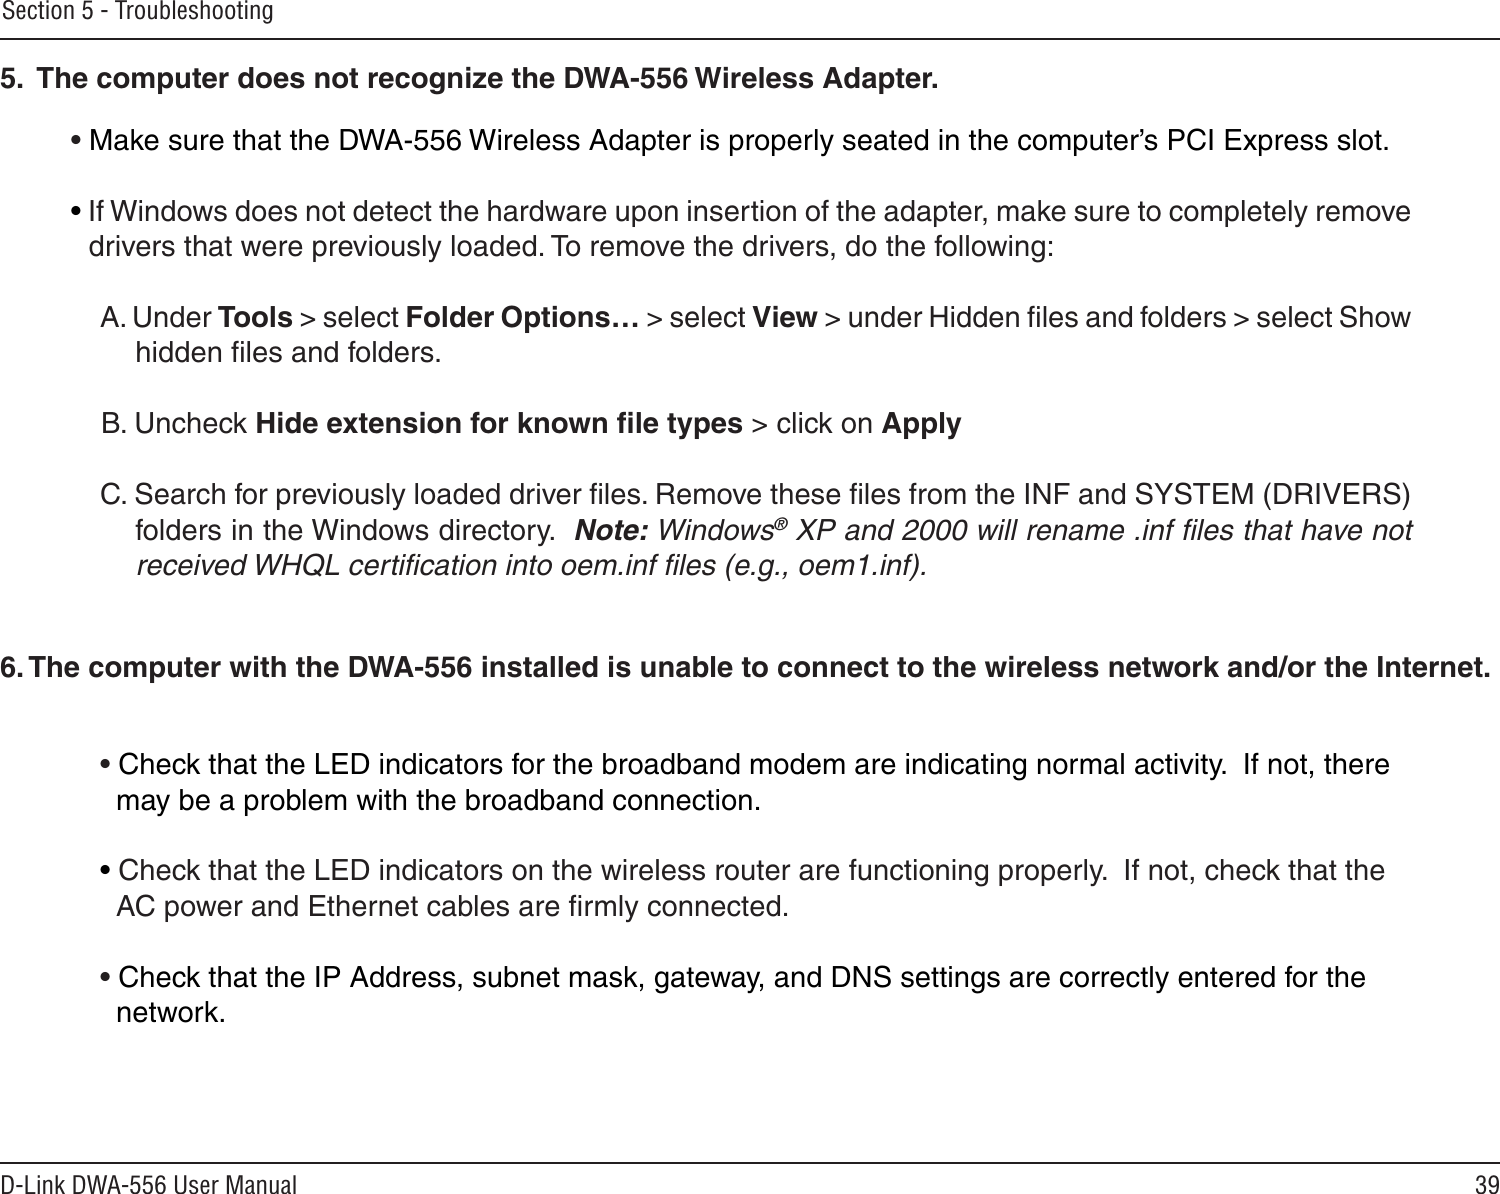 39D-Link DWA-556 User ManualSection 5 - Troubleshooting• Make sure that the DWA-556 Wireless Adapter is properly seated in the computer’s PCI Express slot.• If Windows does not detect the hardware upon insertion of the adapter, make sure to completely remove drivers that were previously loaded. To remove the drivers, do the following:A. Under Tools &gt; select Folder Options… &gt; select View &gt; under Hidden ﬁles and folders &gt; select Show  hidden ﬁles and folders.B. Uncheck Hide extension for known ﬁle types &gt; click on ApplyC. Search for previously loaded driver ﬁles. Remove these ﬁles from the INF and SYSTEM (DRIVERS) folders in the Windows directory.  Note: Windows® XP and 2000 will rename .inf ﬁles that have not received WHQL certiﬁcation into oem.inf ﬁles (e.g., oem1.inf).5.  The computer does not recognize the DWA-556 Wireless Adapter.• Check that the LED indicators for the broadband modem are indicating normal activity.  If not, there   may be a problem with the broadband connection.• Check that the LED indicators on the wireless router are functioning properly.  If not, check that the   AC power and Ethernet cables are ﬁrmly connected.• Check that the IP Address, subnet mask, gateway, and DNS settings are correctly entered for the   network.6. The computer with the DWA-556 installed is unable to connect to the wireless network and/or the Internet.